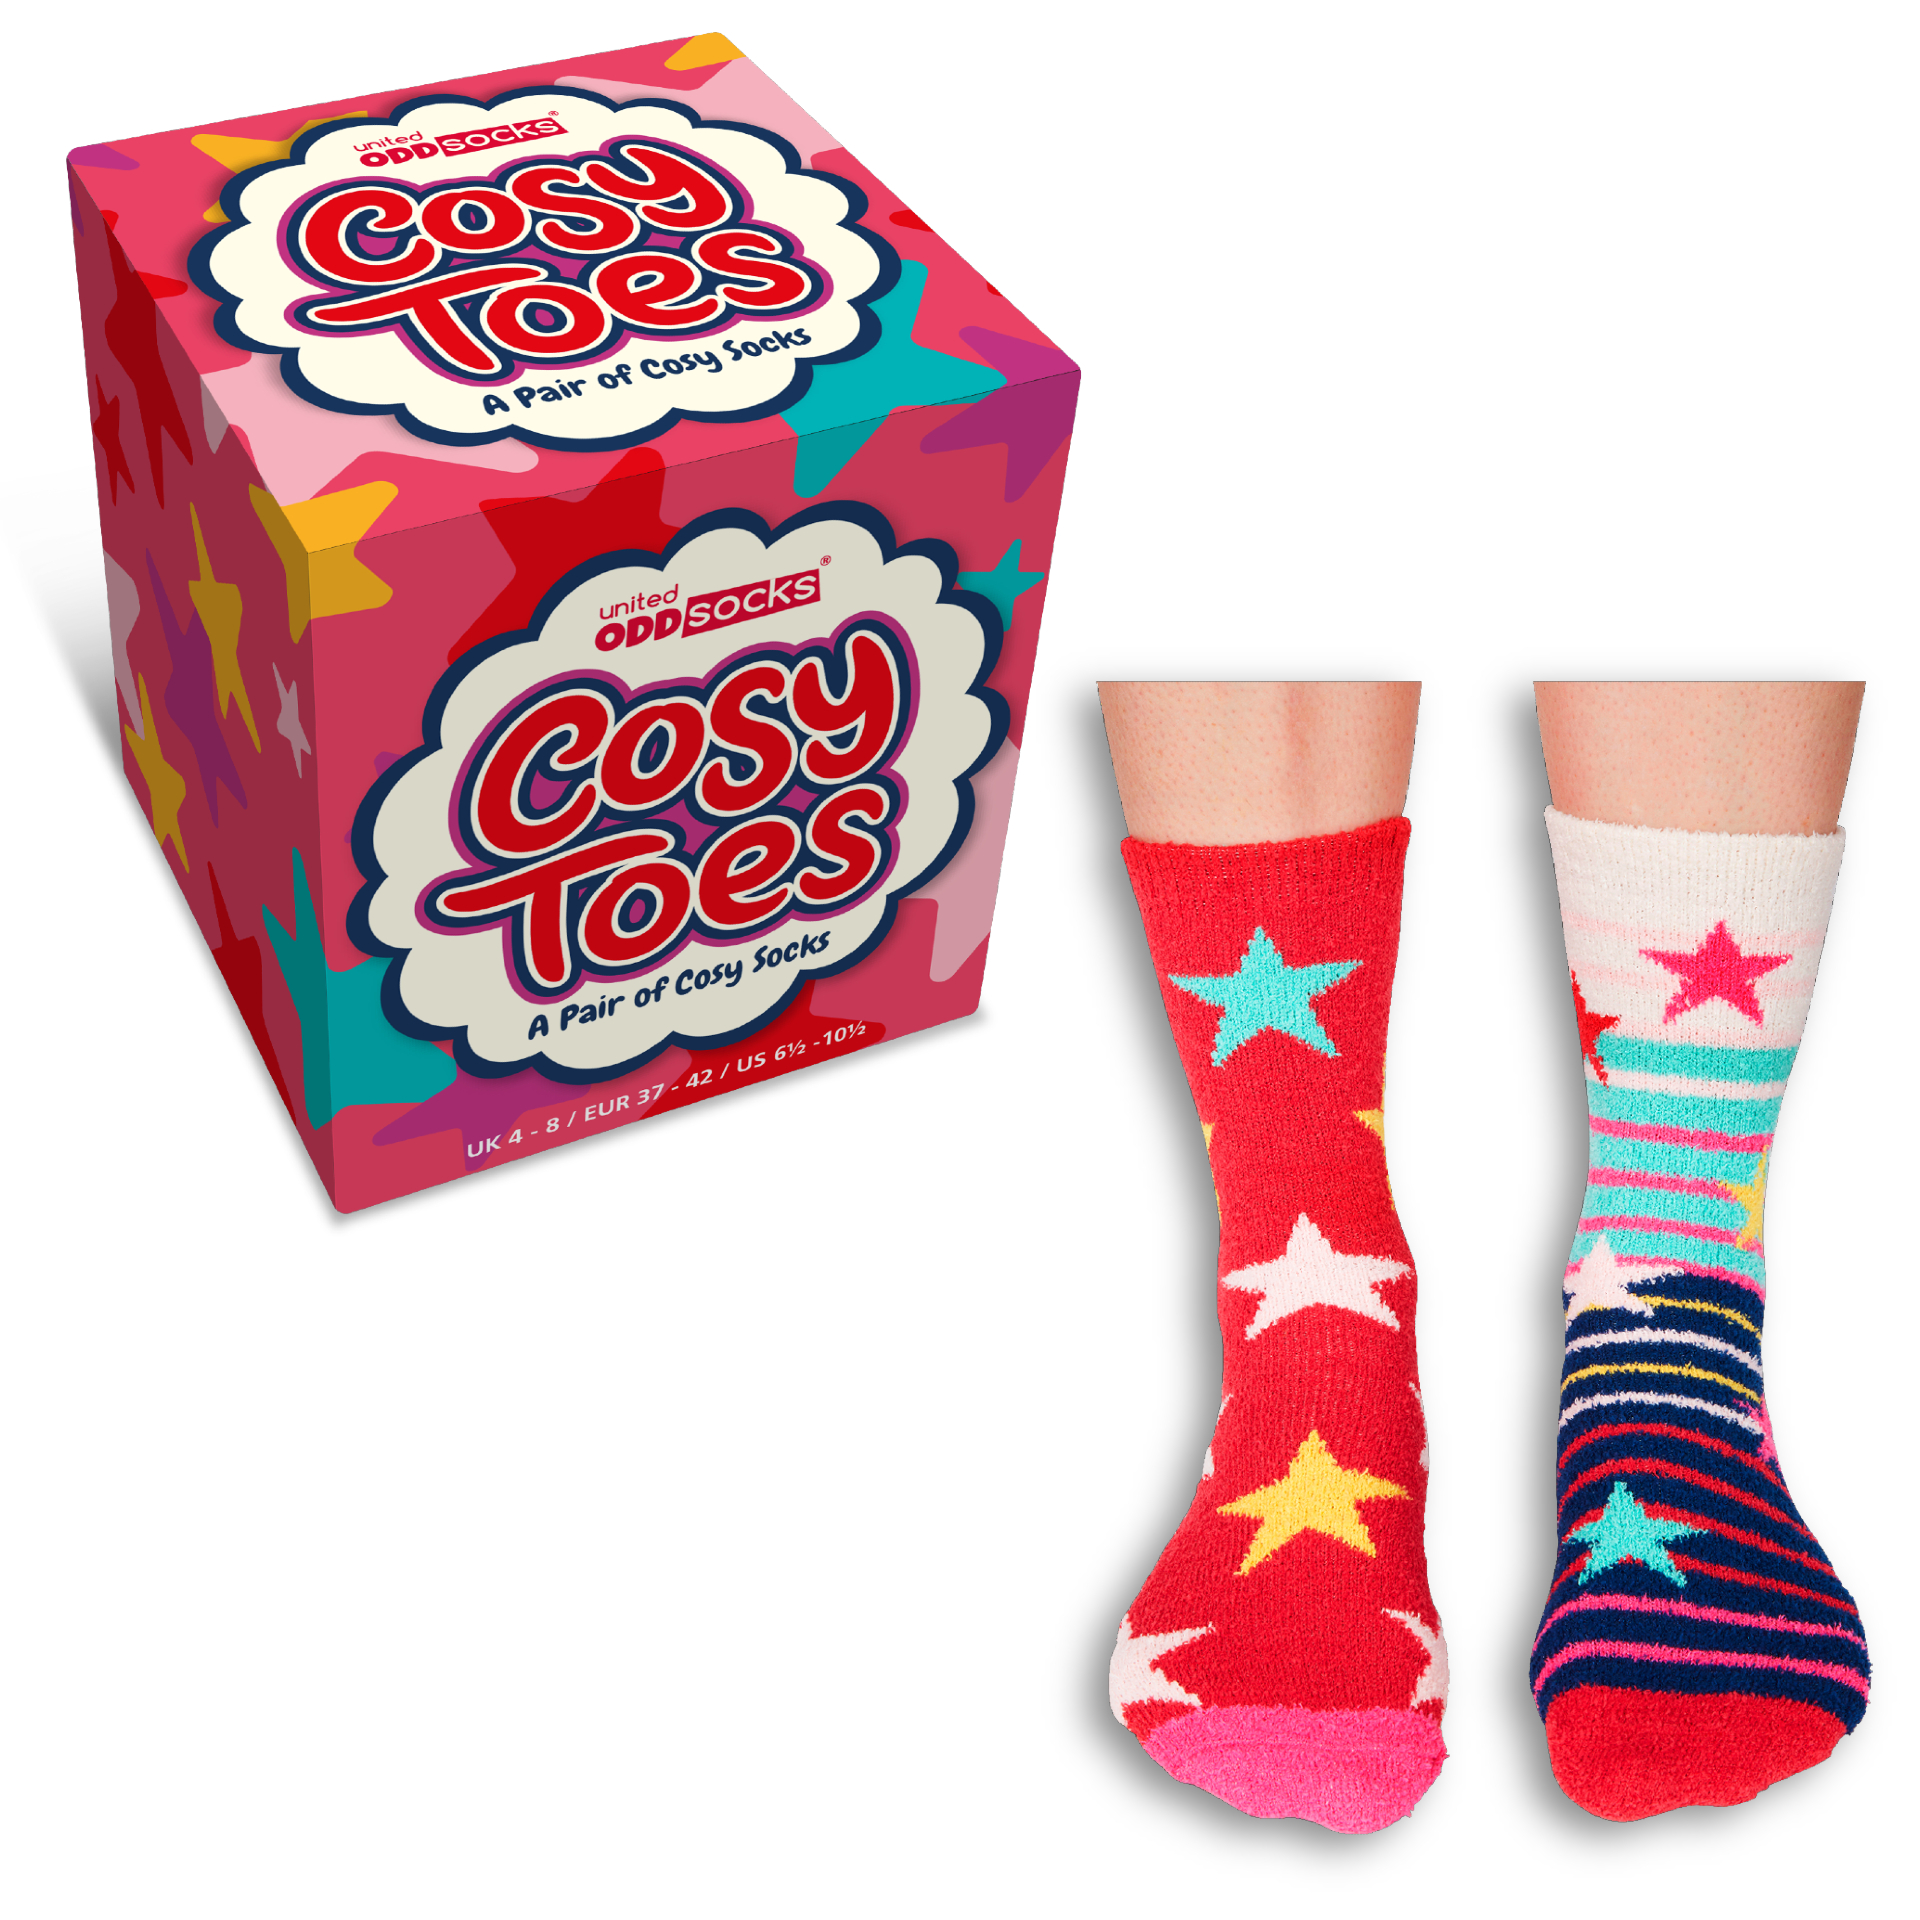 United Oddsocks Cosy Toes Pair of Comfy Star Themed Women's Socks